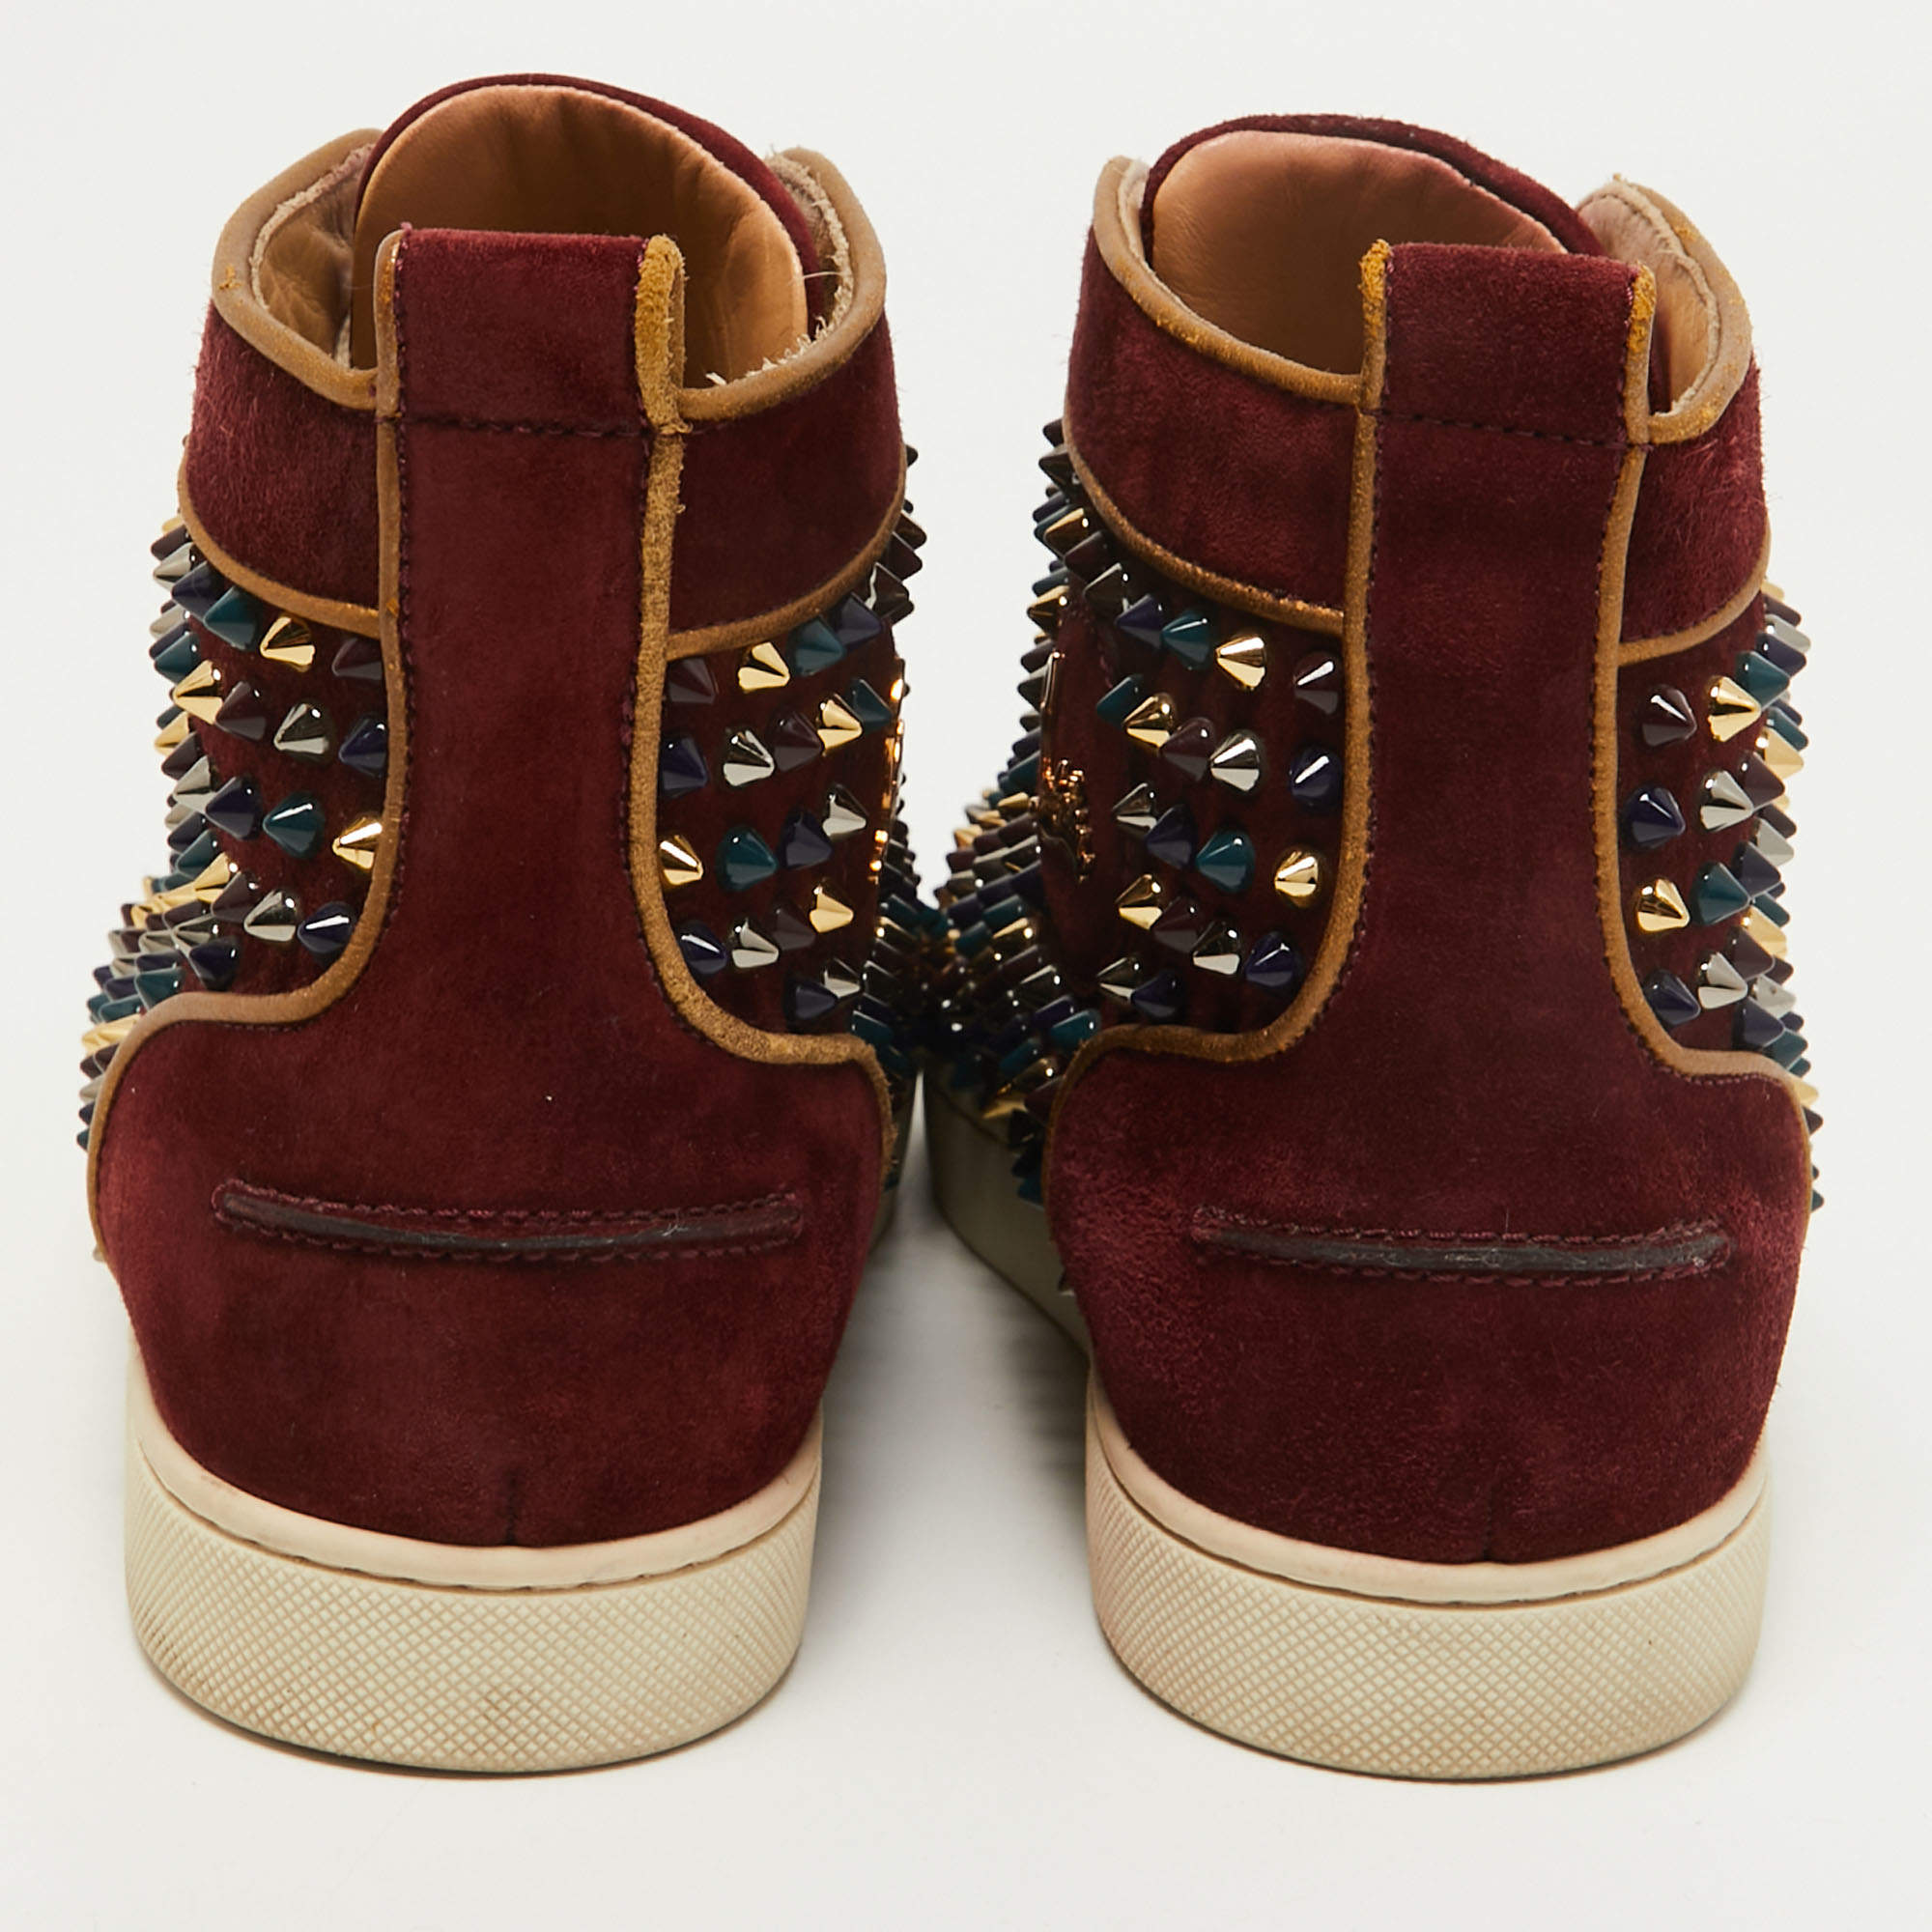 Christian Louboutin Burgundy Suede Louis Spikes High Top Sneakers Size 39  Christian Louboutin